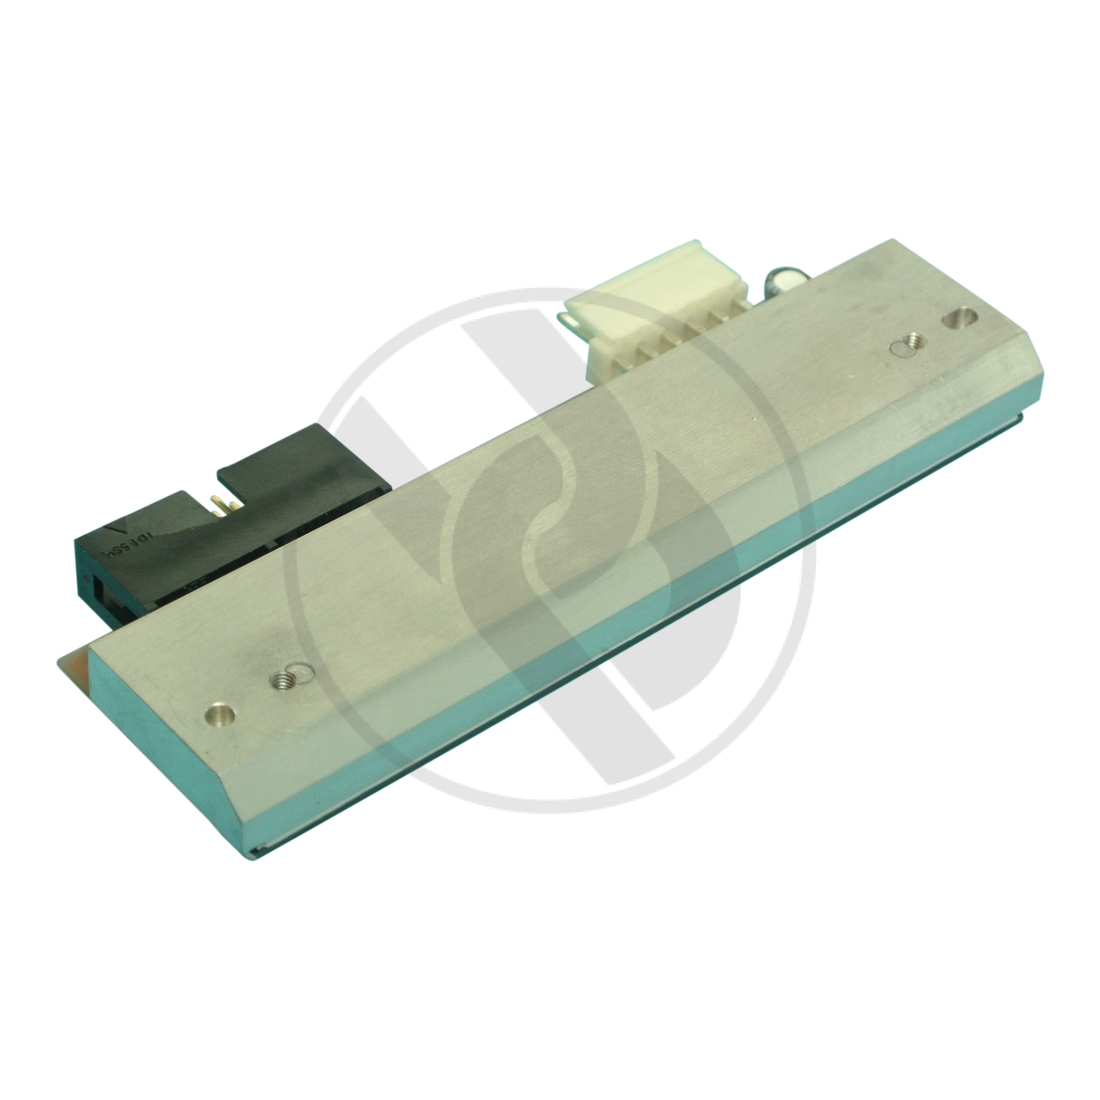 Thermal printhead, 107 mm, Longlife, for Allen